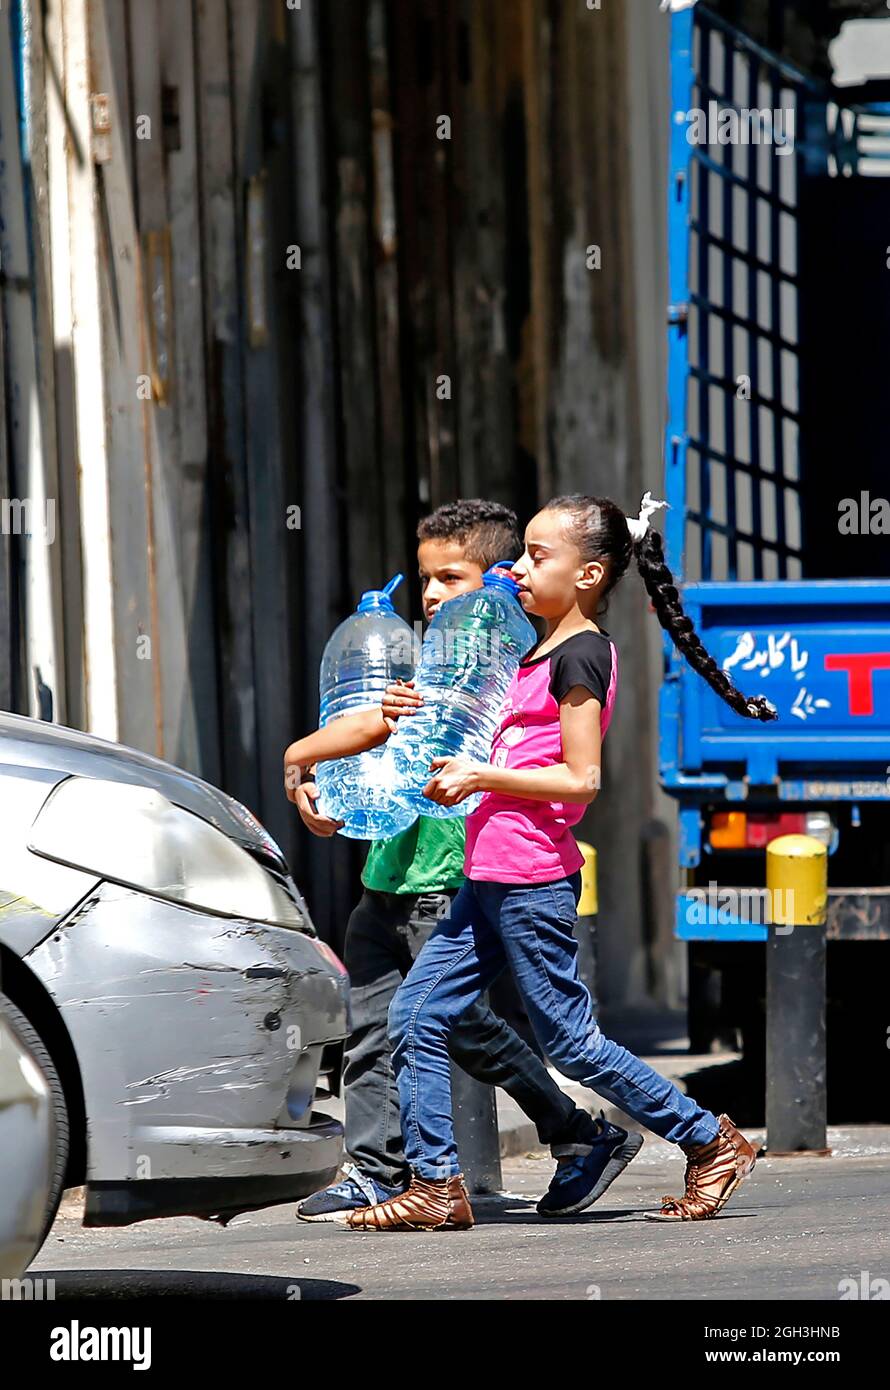 Beirut, Lebanon. 4th Sep, 2021. Children carry water in Beirut, Lebanon, on Sept. 4, 2021. Lebanon's multifaceted crises are having severe impacts on children which account for about one-third of the total population, said a senior UNICEF official over the weekend. Credit: Bilal Jawich/Xinhua/Alamy Live News Stock Photo